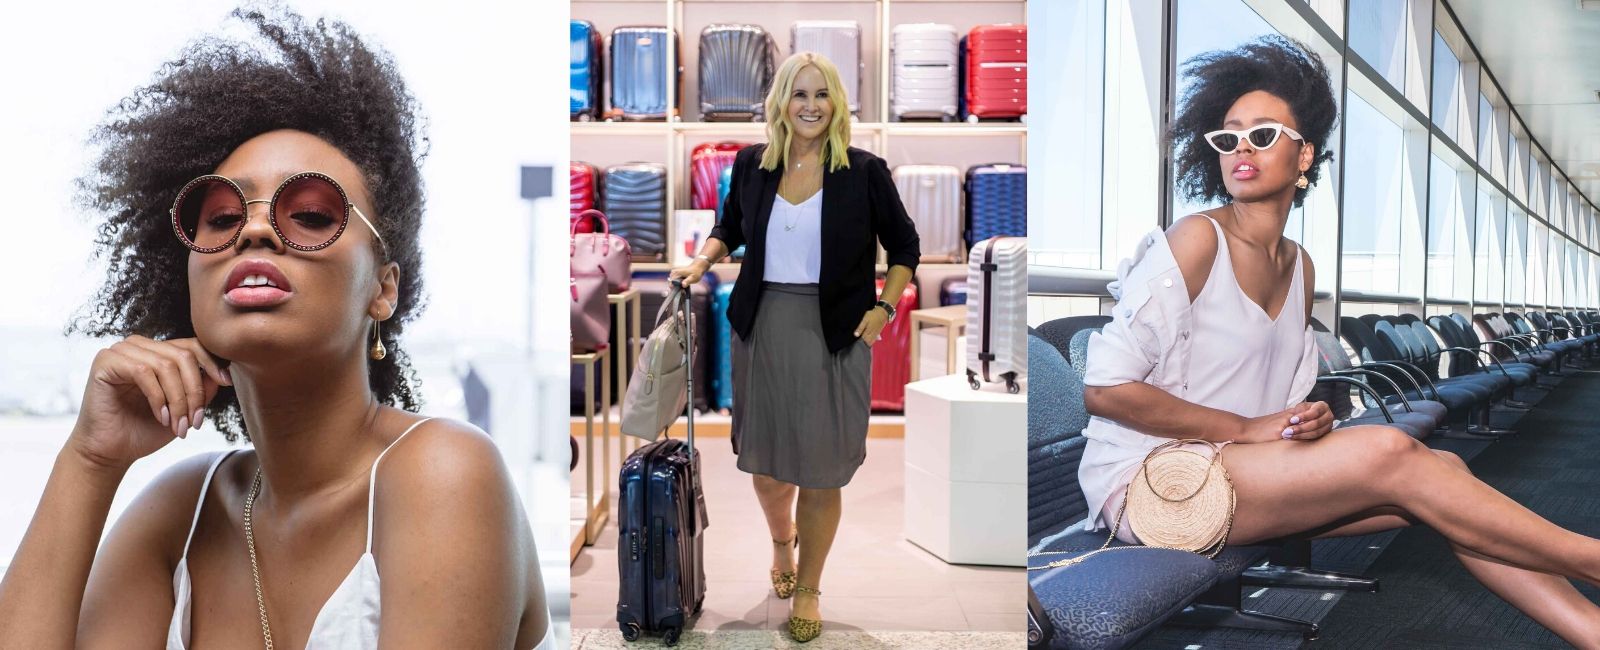 Gifts to splurge on Domestic Terminal Brisbane - Sunglass Hut, Samsonite | Your ultimate Christmas gift guide: Where to buy gifts for all budgets at Brisbane Airport